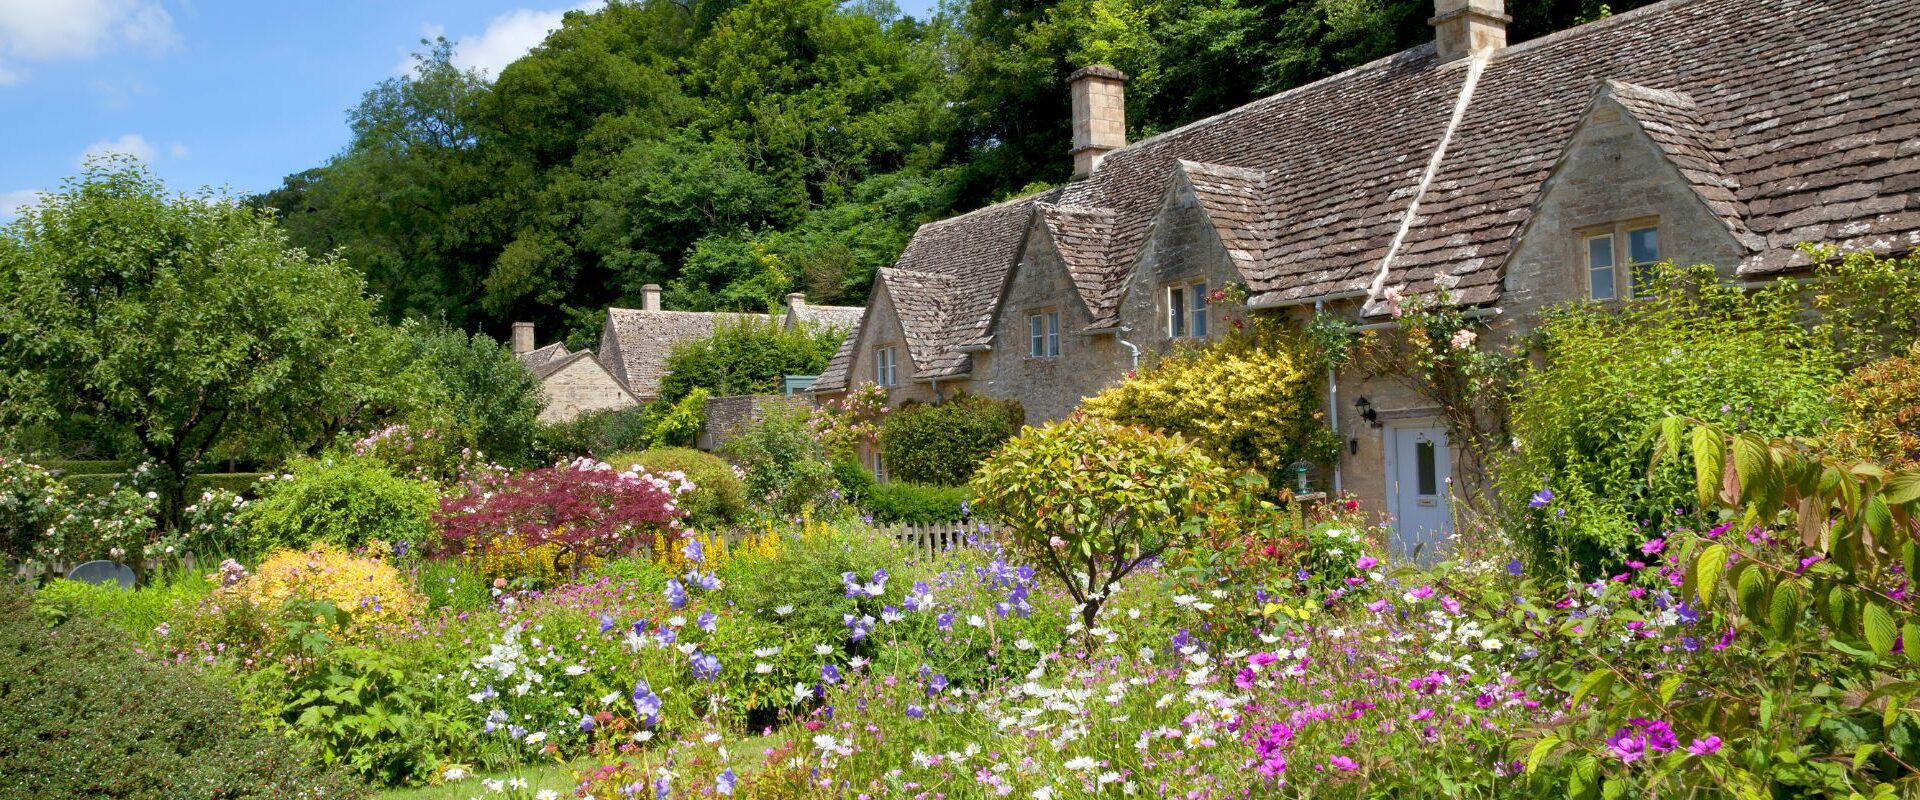 Holiday Cottages in Gloucestershire